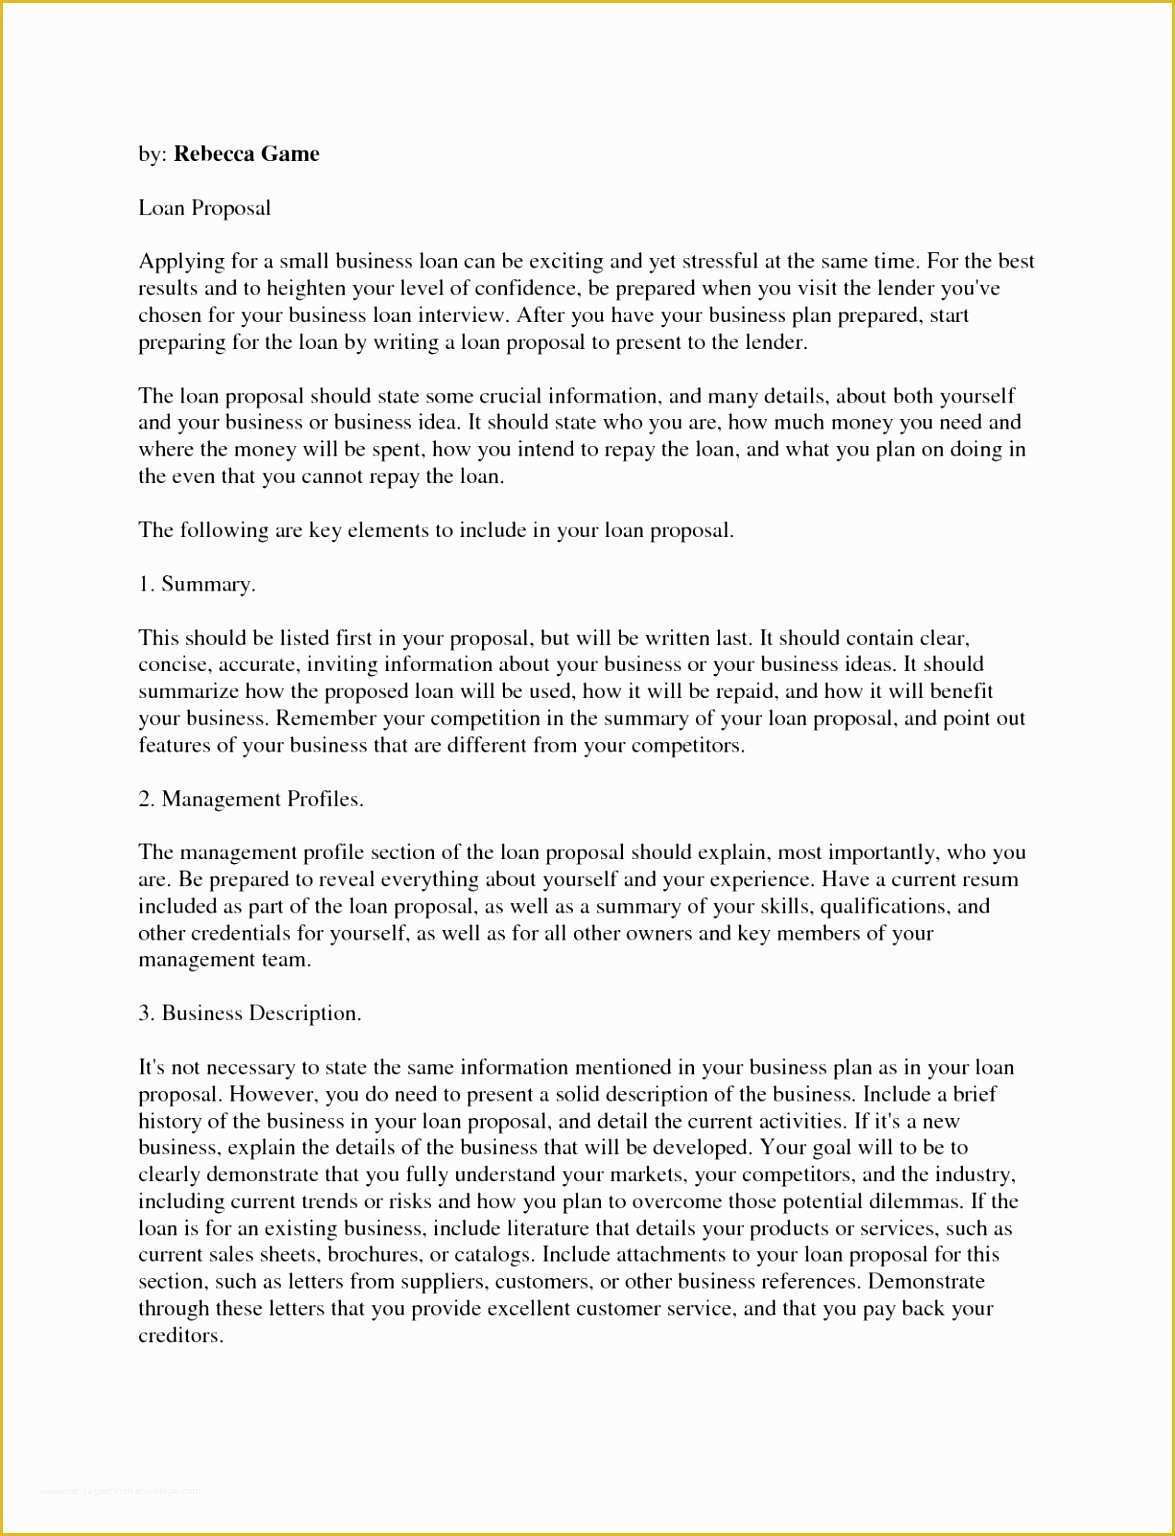 Free Business Contract Templates for Word Of 12 Free Contract Templates for Small Business Iotuj